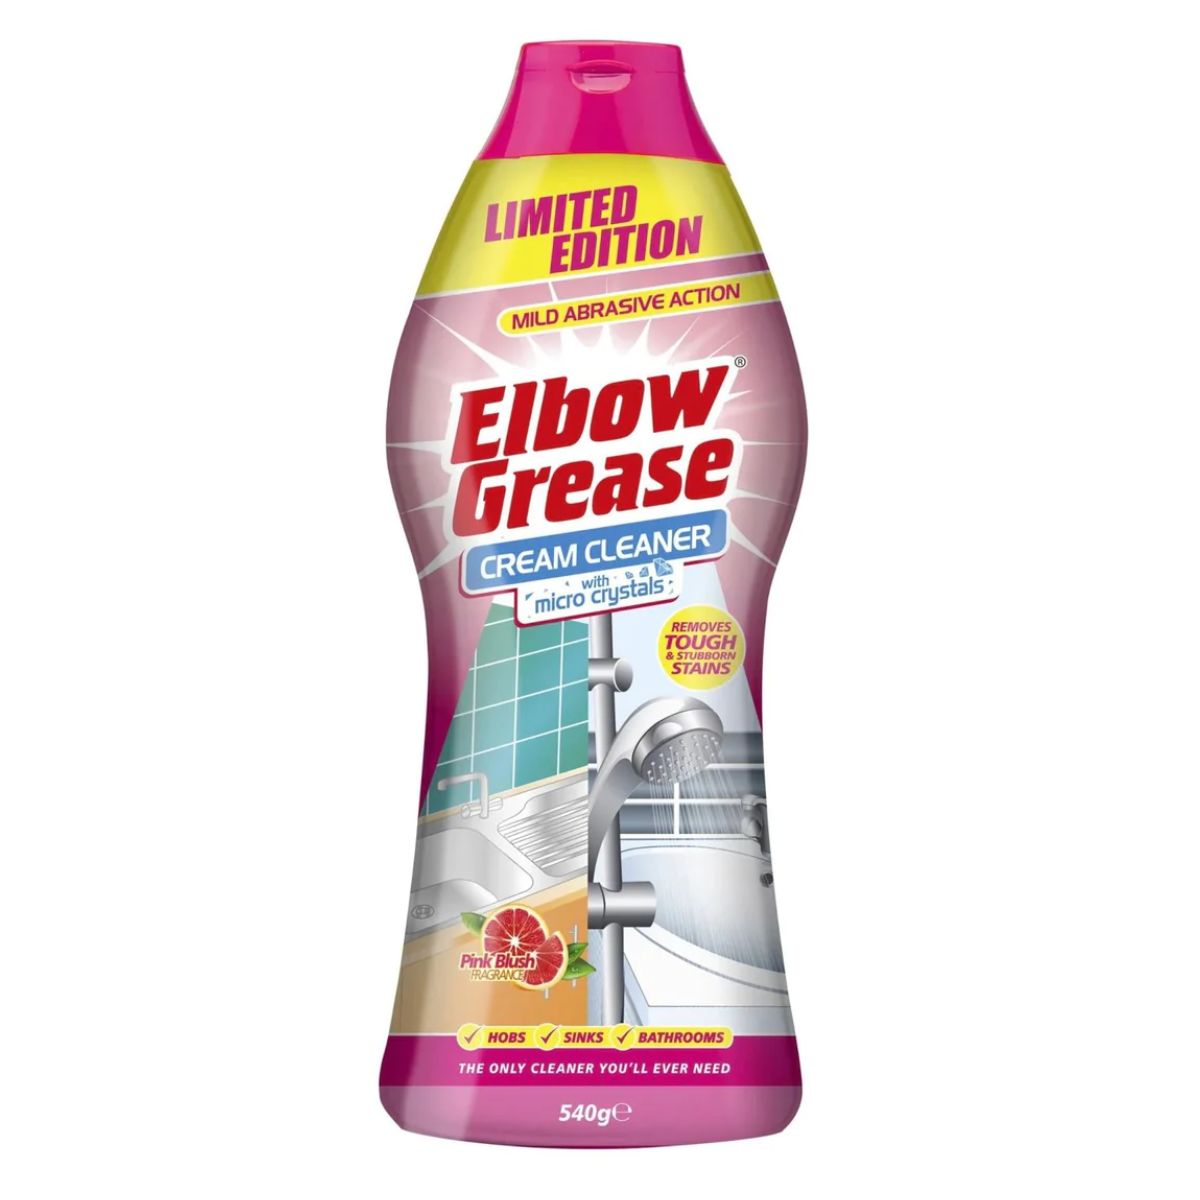 A bottle of Elbow Grease - Pink Cream Cleaner - 540g on a white background.